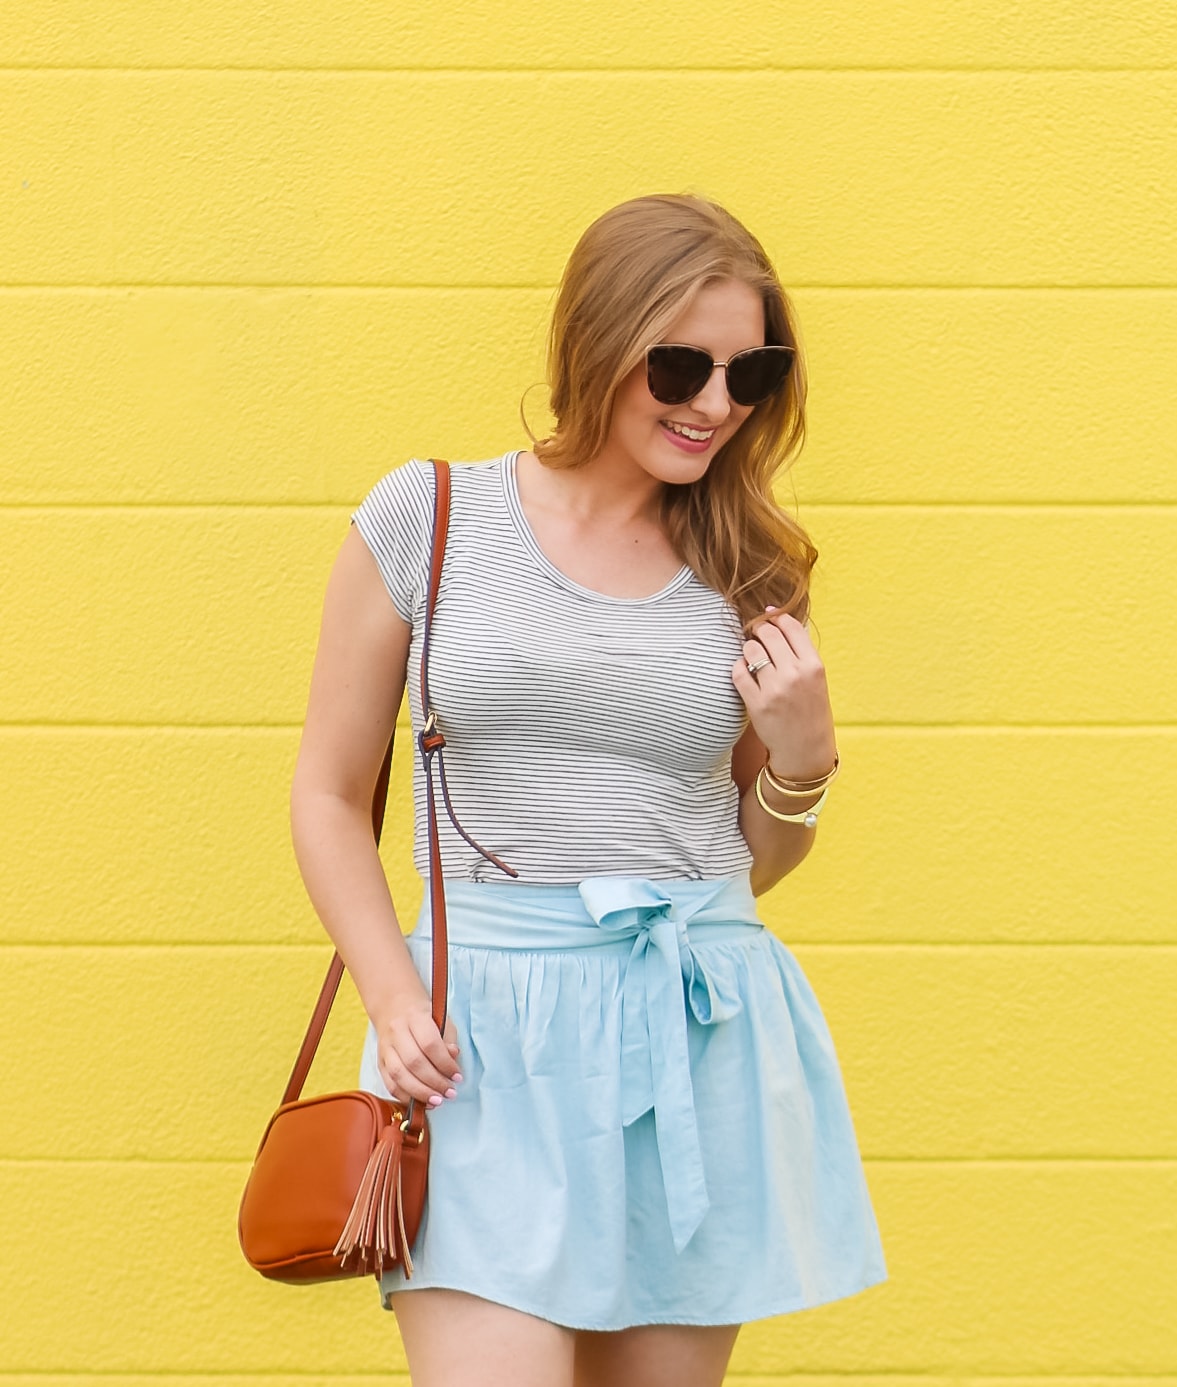 Looking for a cute summer vacation outfit idea? This casual look by Ashley Brooke Nicholas is absolutely adorable. I'm obsessed with the mint green Keds from Zappos, and the Quay My Girl sunglasses in tortoiseshell might be the great sunnies of all time!